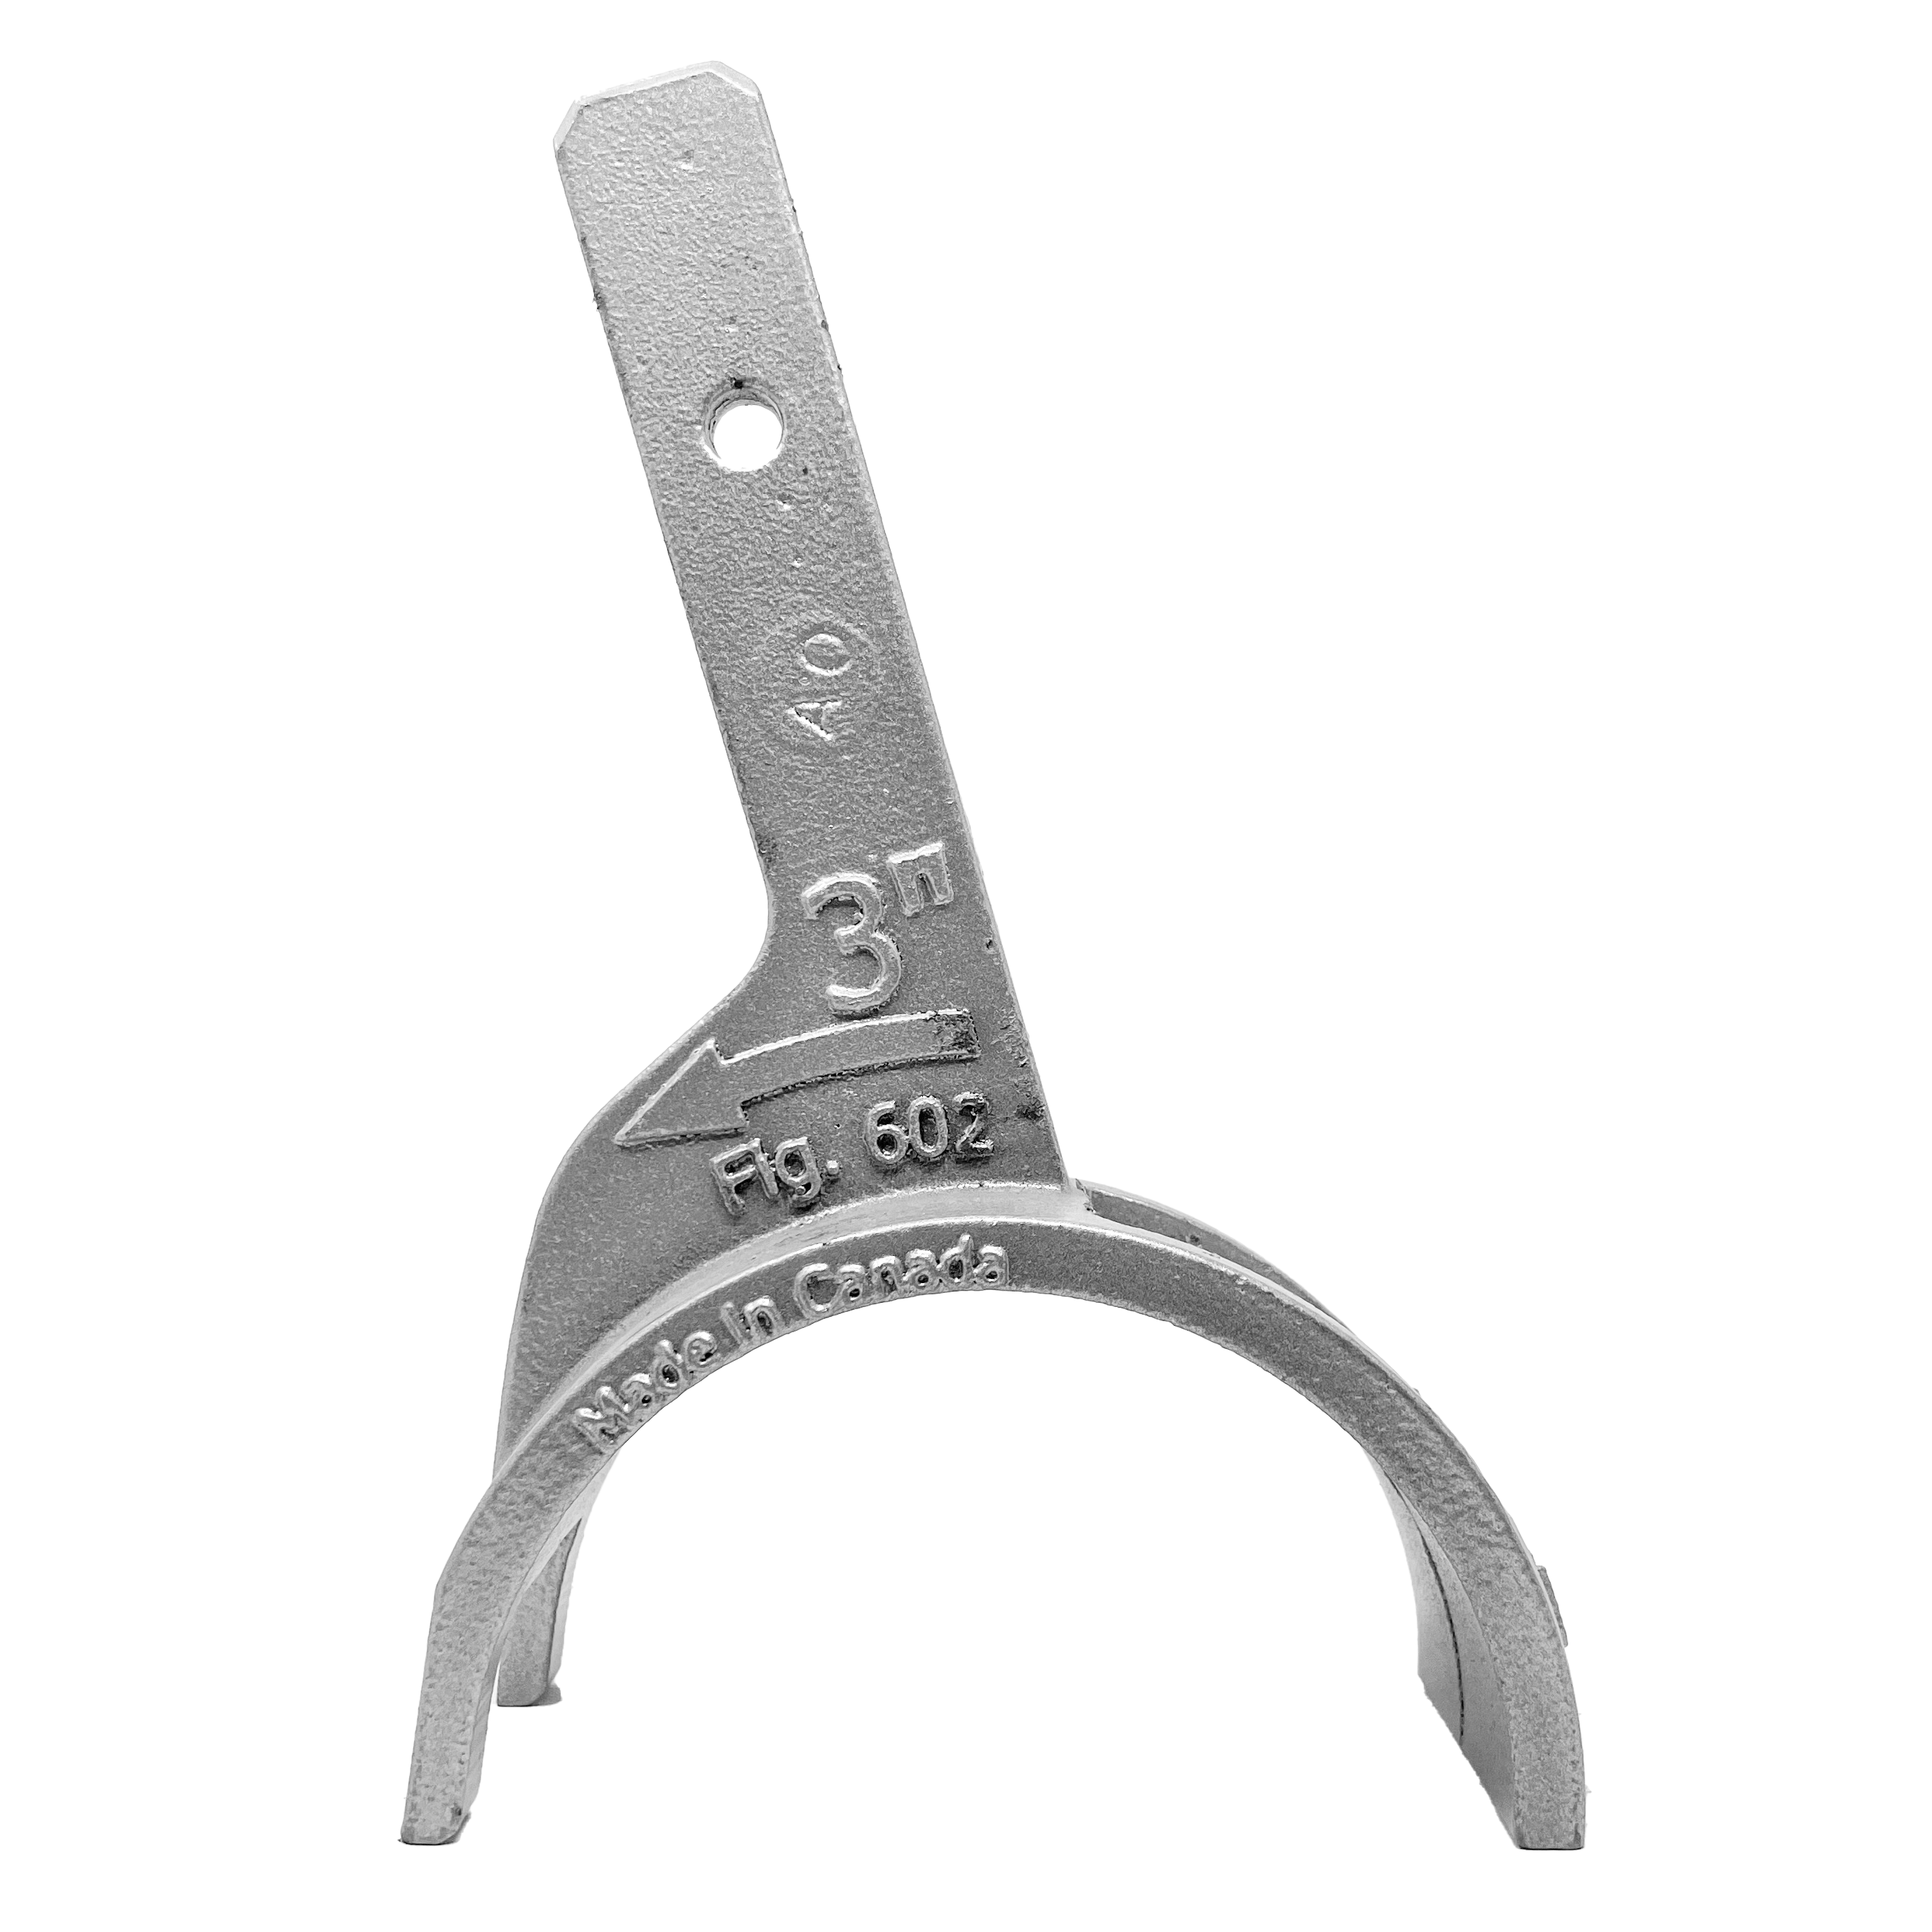 710-0023 HUWE Wrench Head for 3" Figure 602, Figure 1002